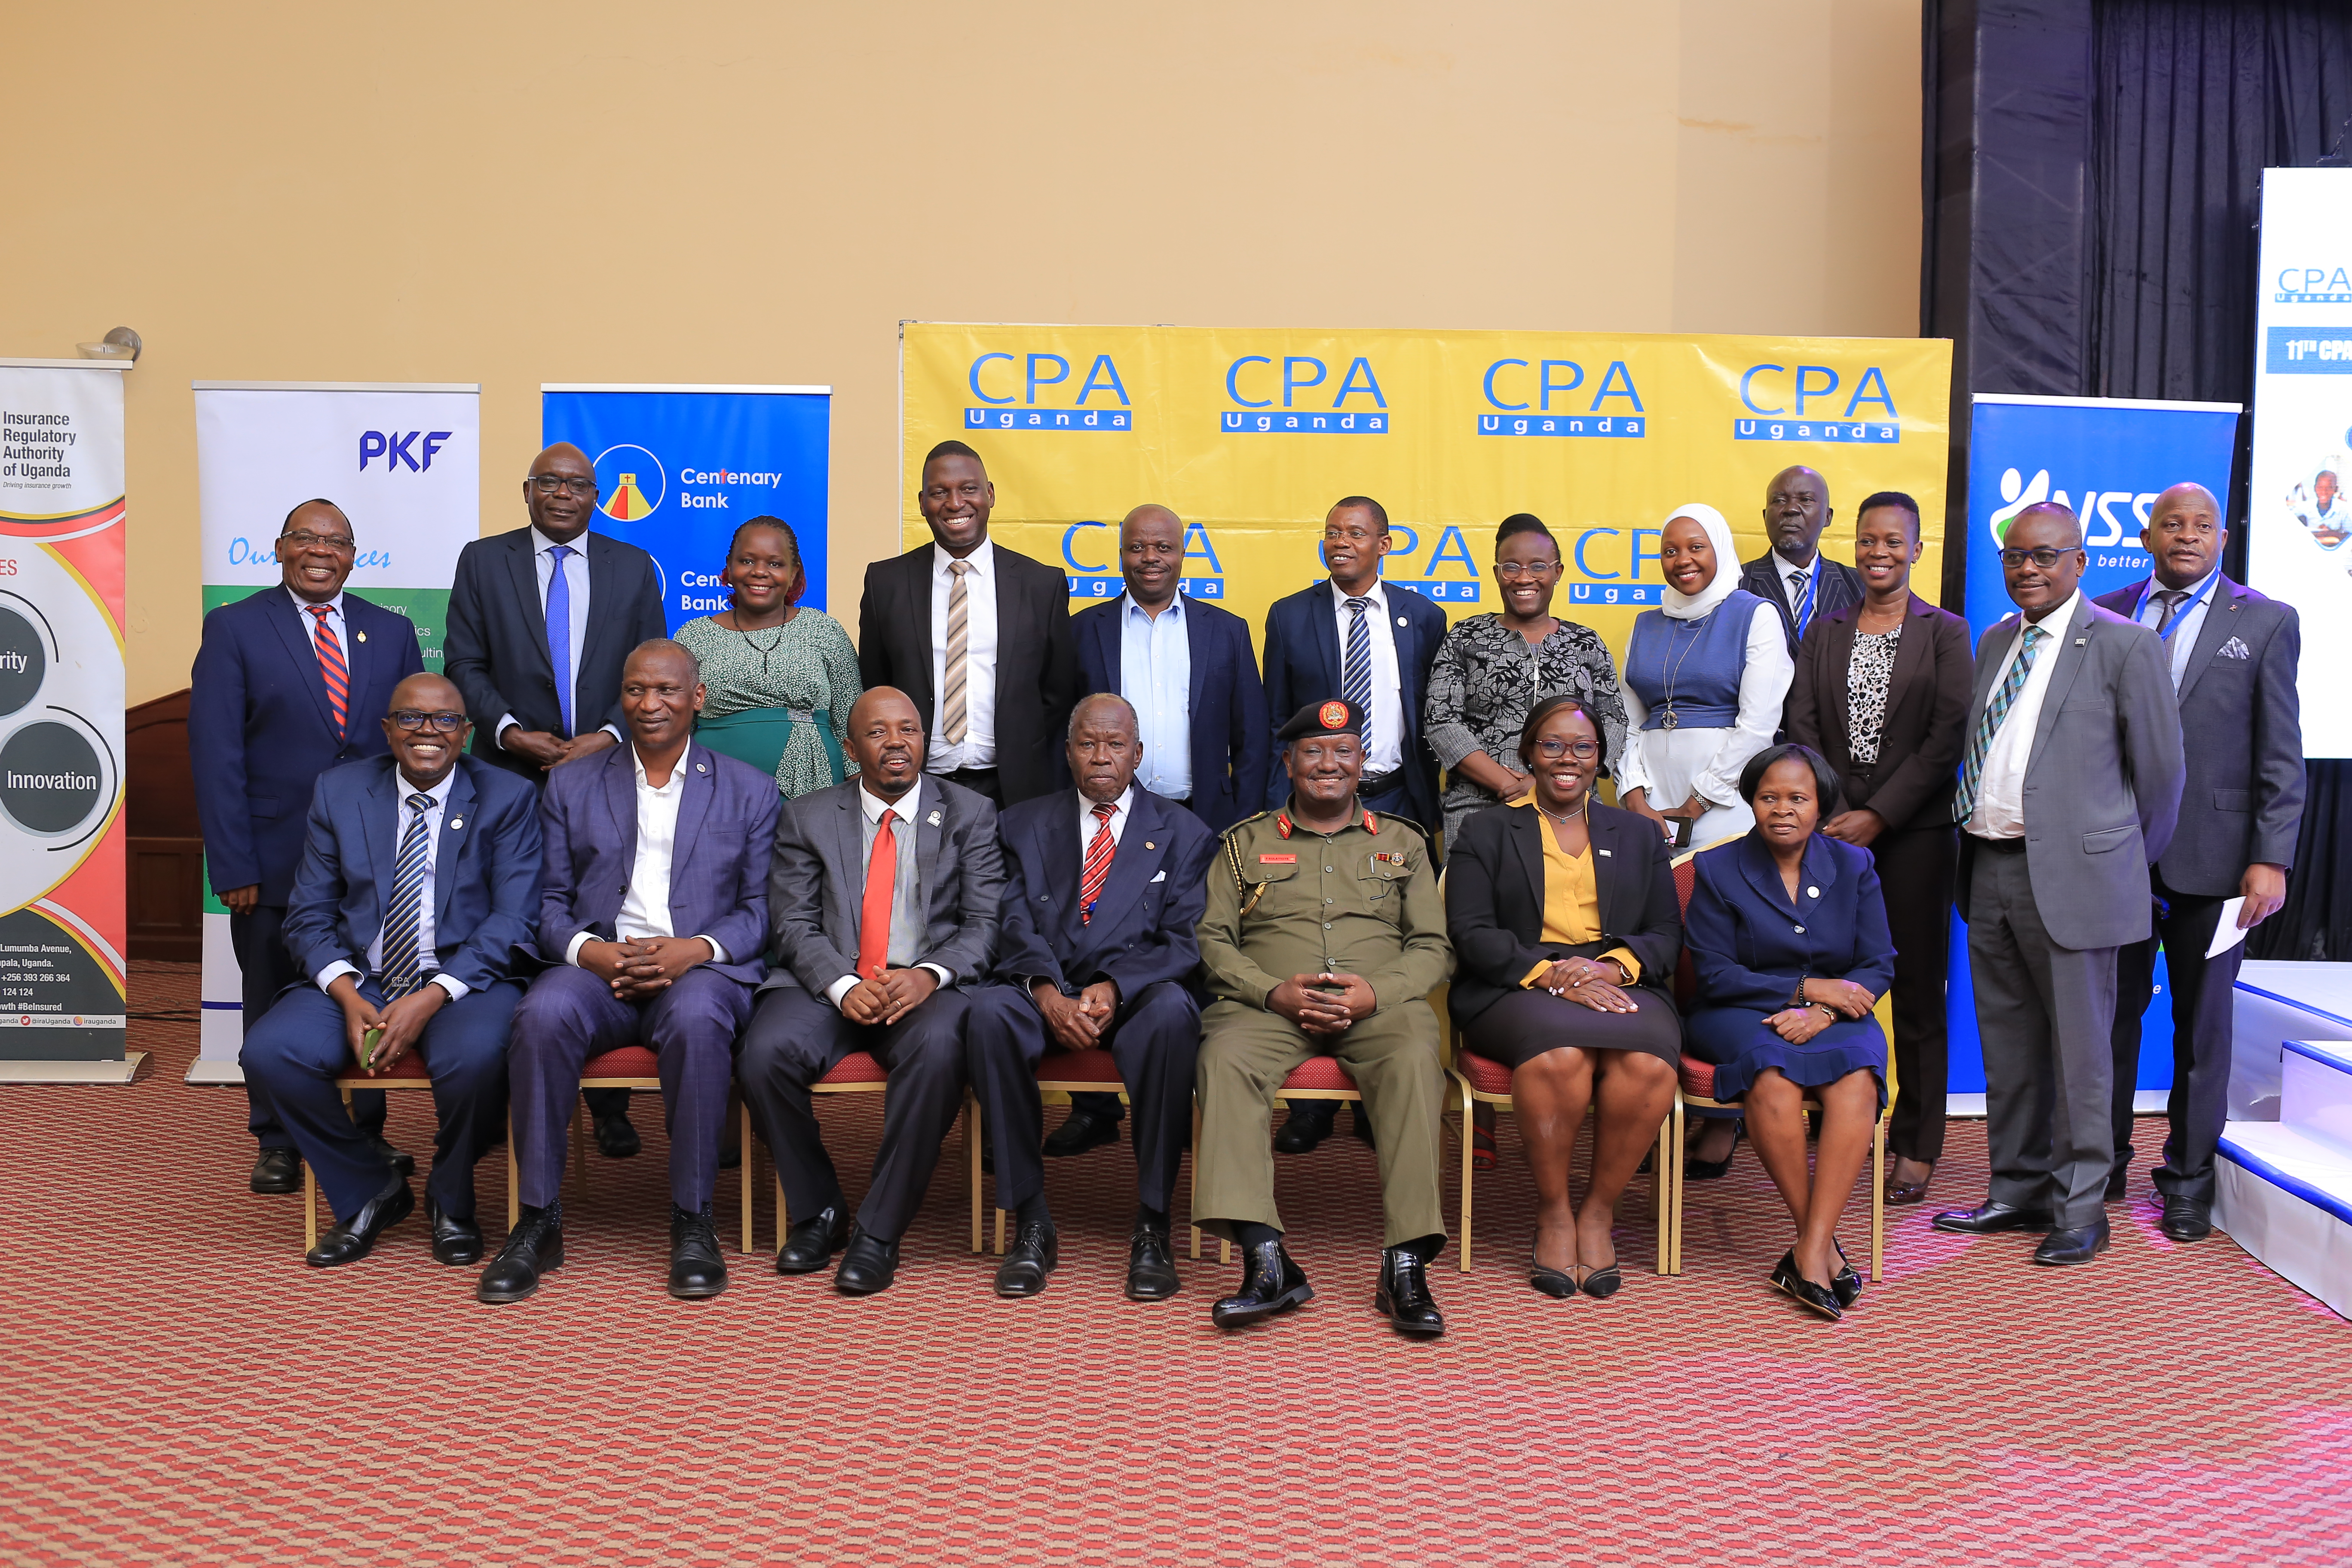 ICPAU President (seated-2nd right), Brig. Gen Felix Kulaigye (Seated- 3rd right) posing for a photograph with some Council Members and ICPAU Past Presidents